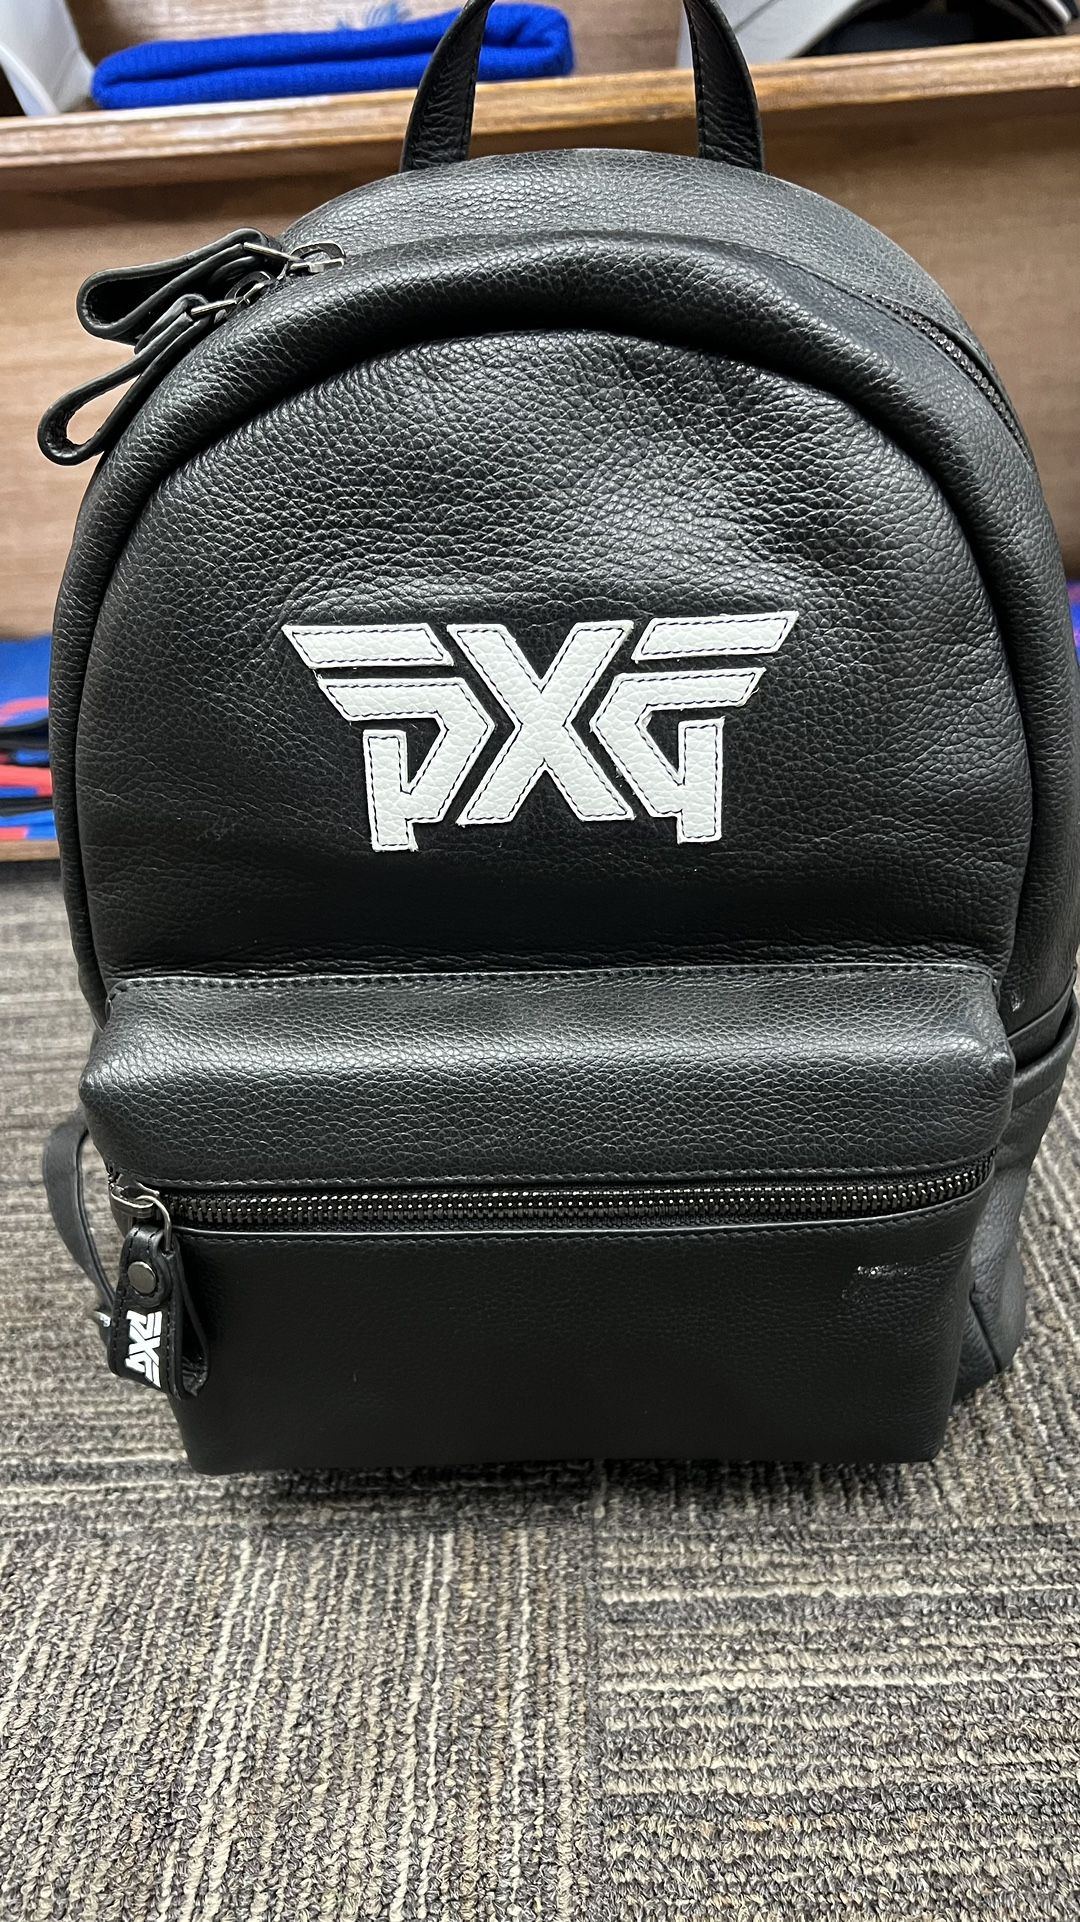 PXG Women’s Backpack